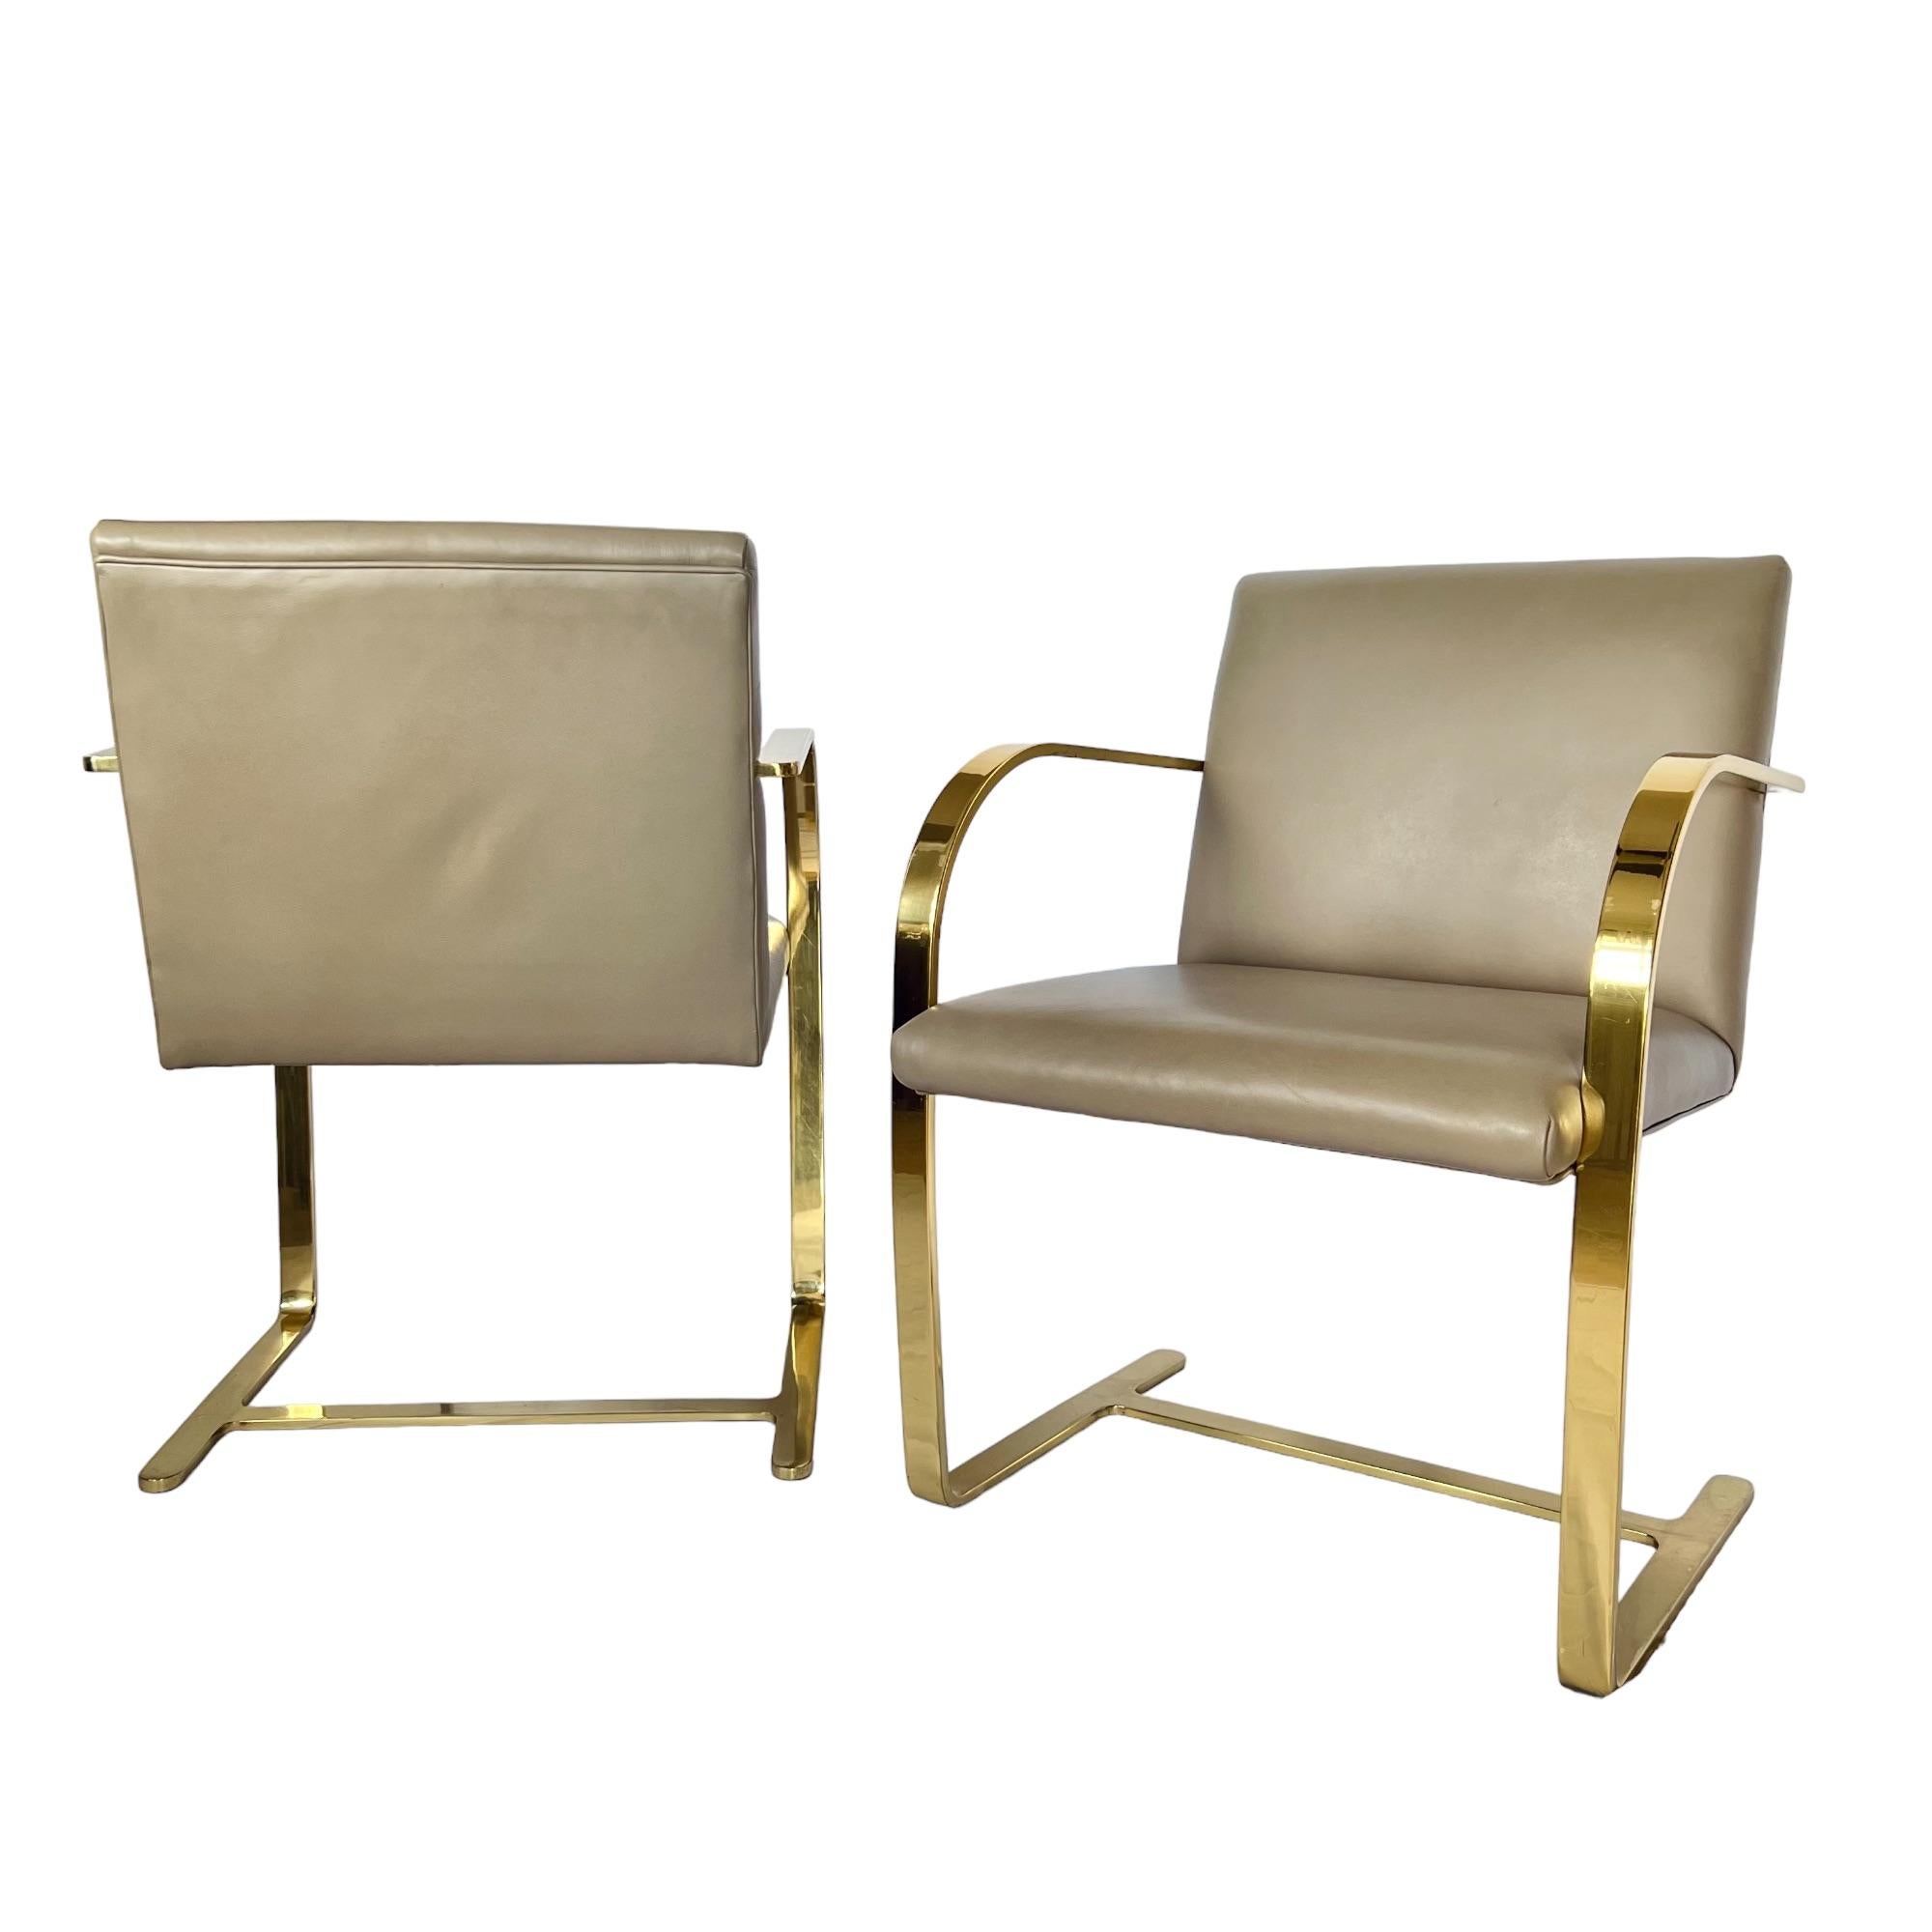 Polished Mies Van Der Rohe Brno Gold Brass Flat Bar Leather Chairs, a Pair For Sale